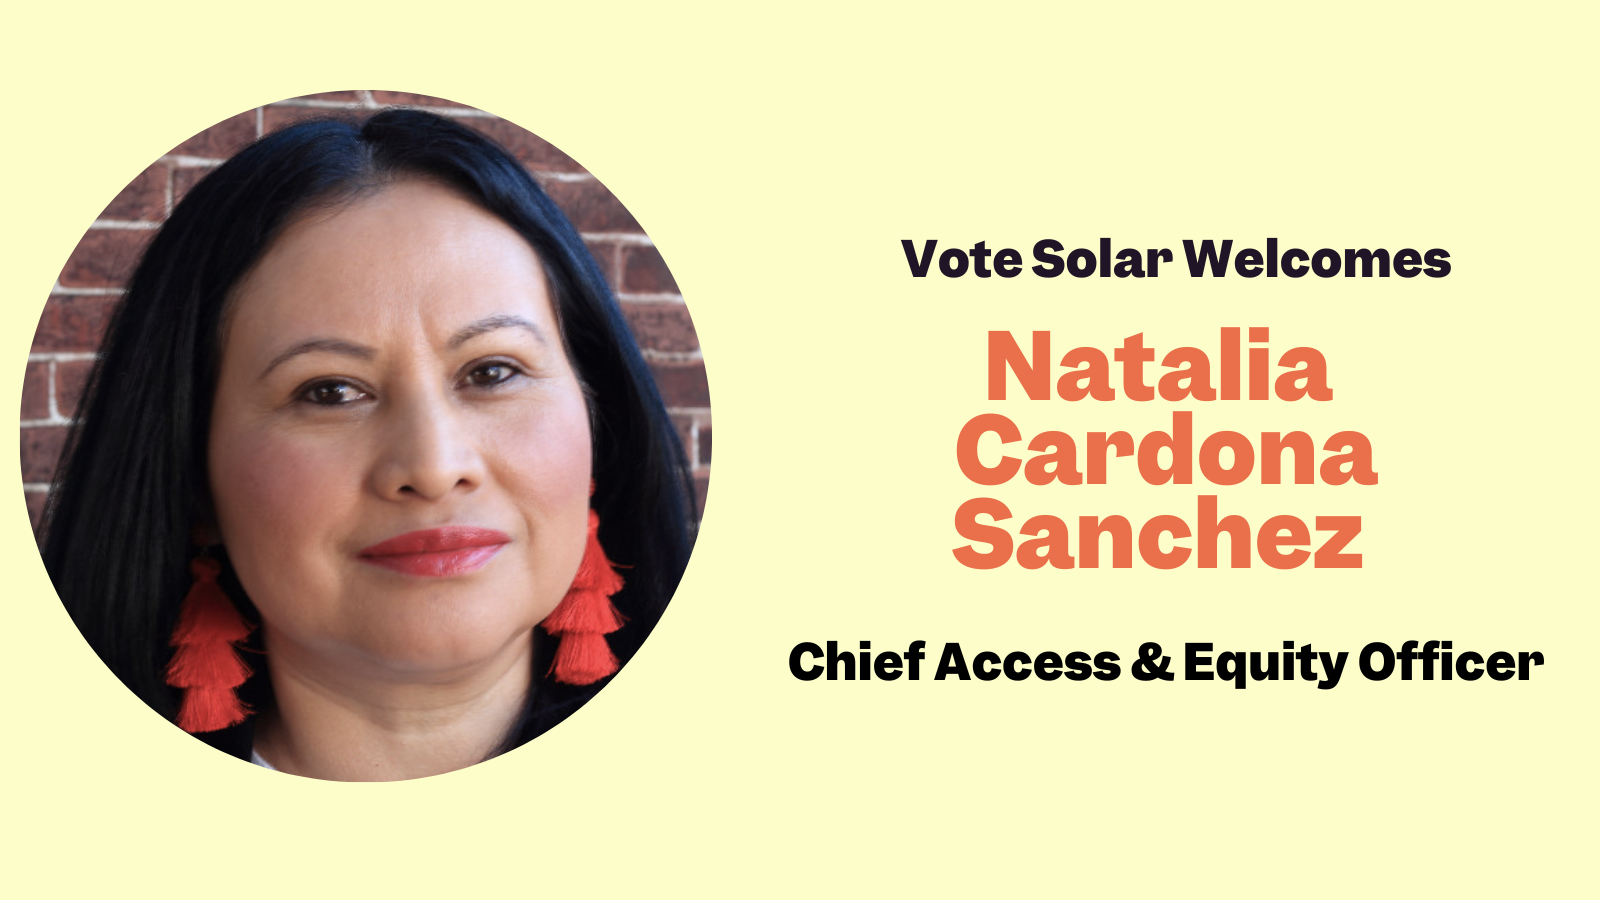 Vote Solar Welcomes Natalia Cardona Sanchez as Chief Access & Equity Officer